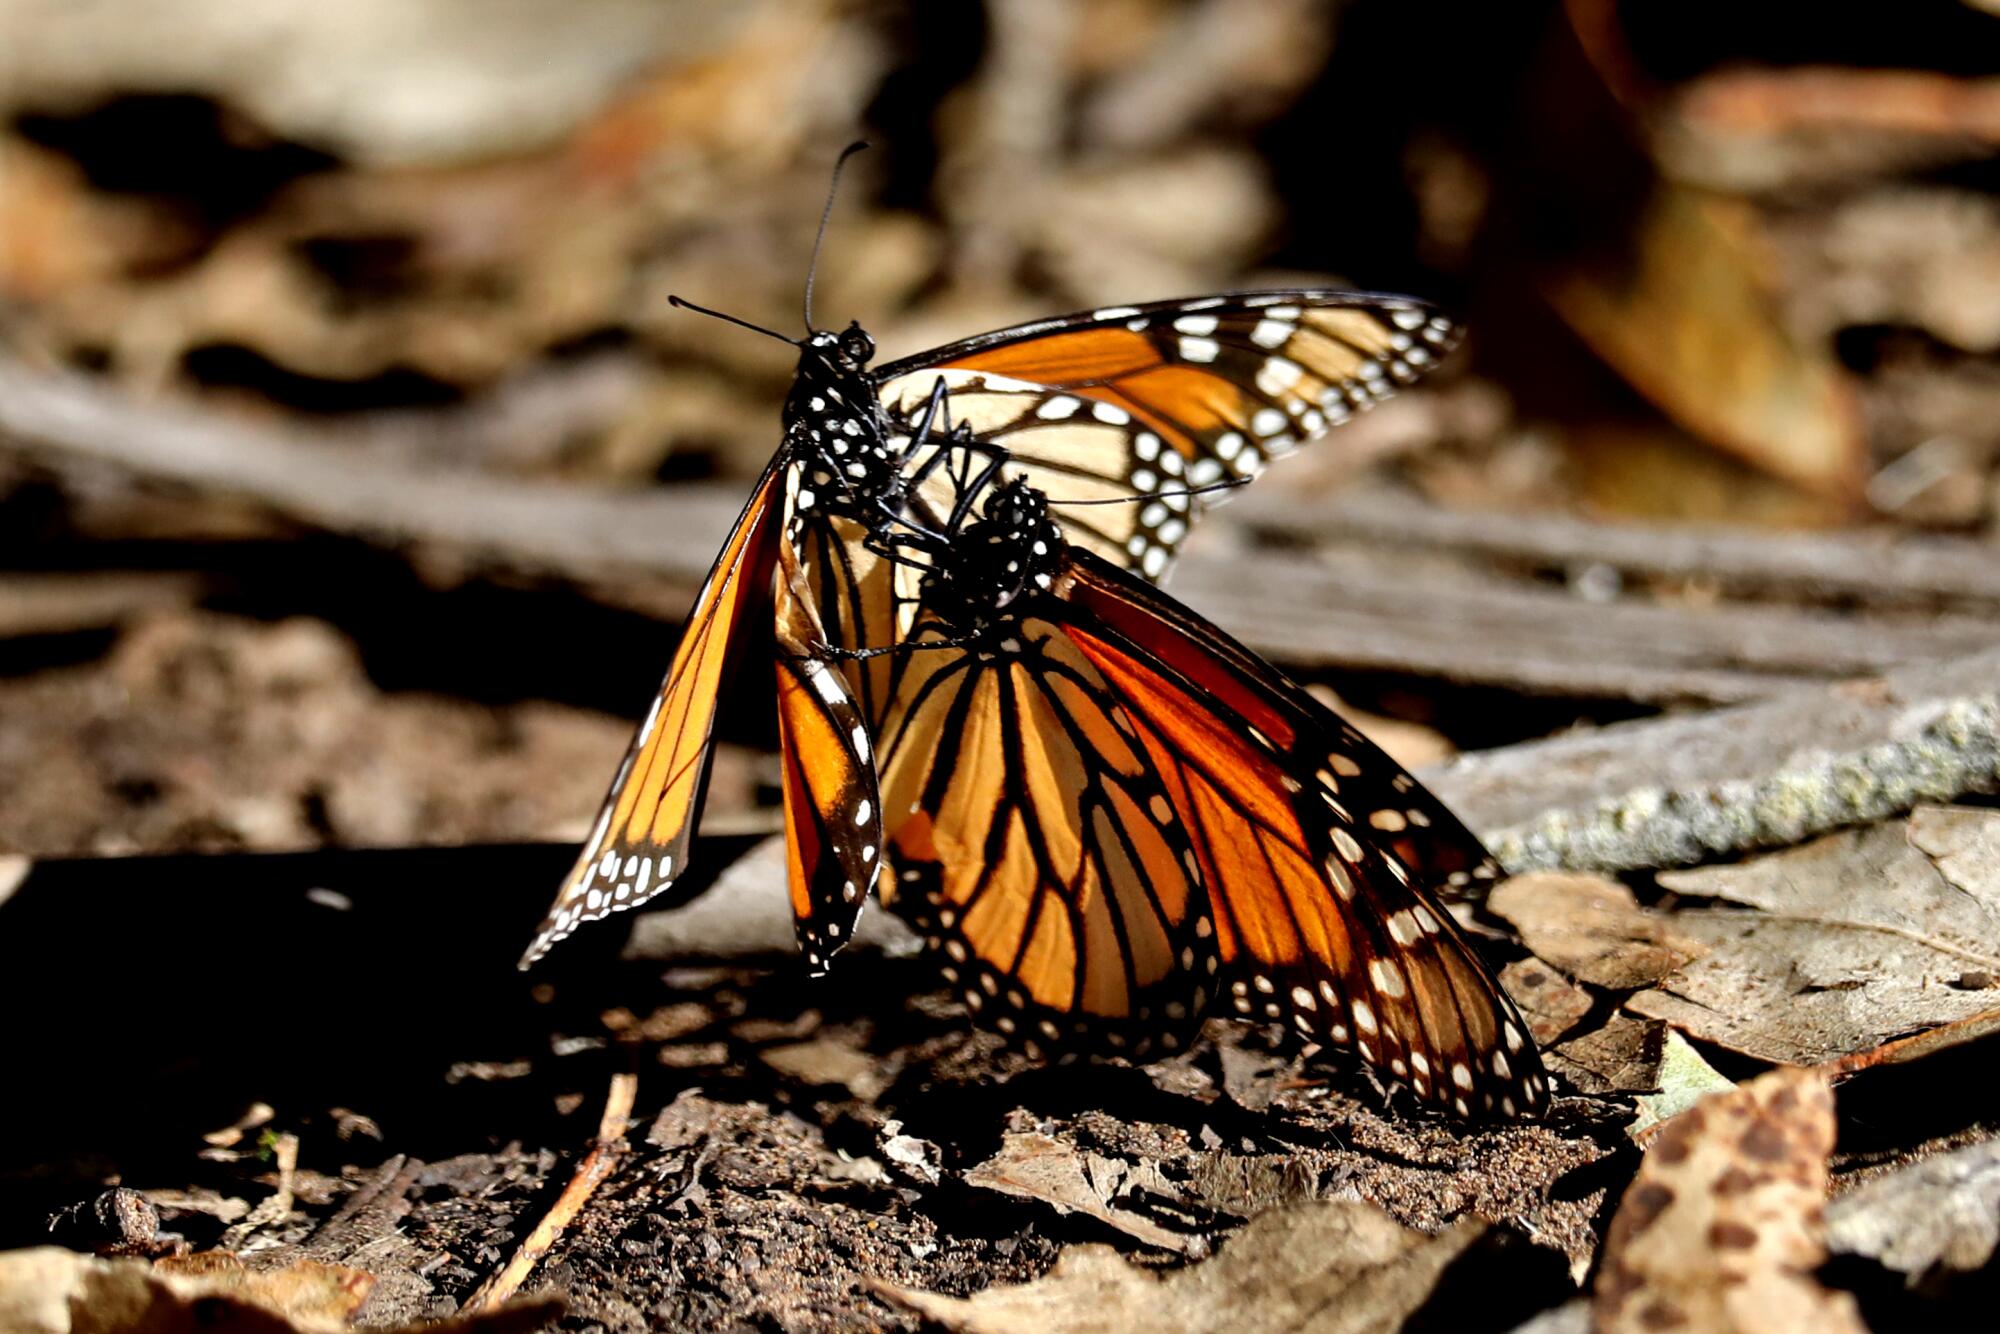 A male captures a female to mate at the Coastal Access Monarch Butterfly Preserve.